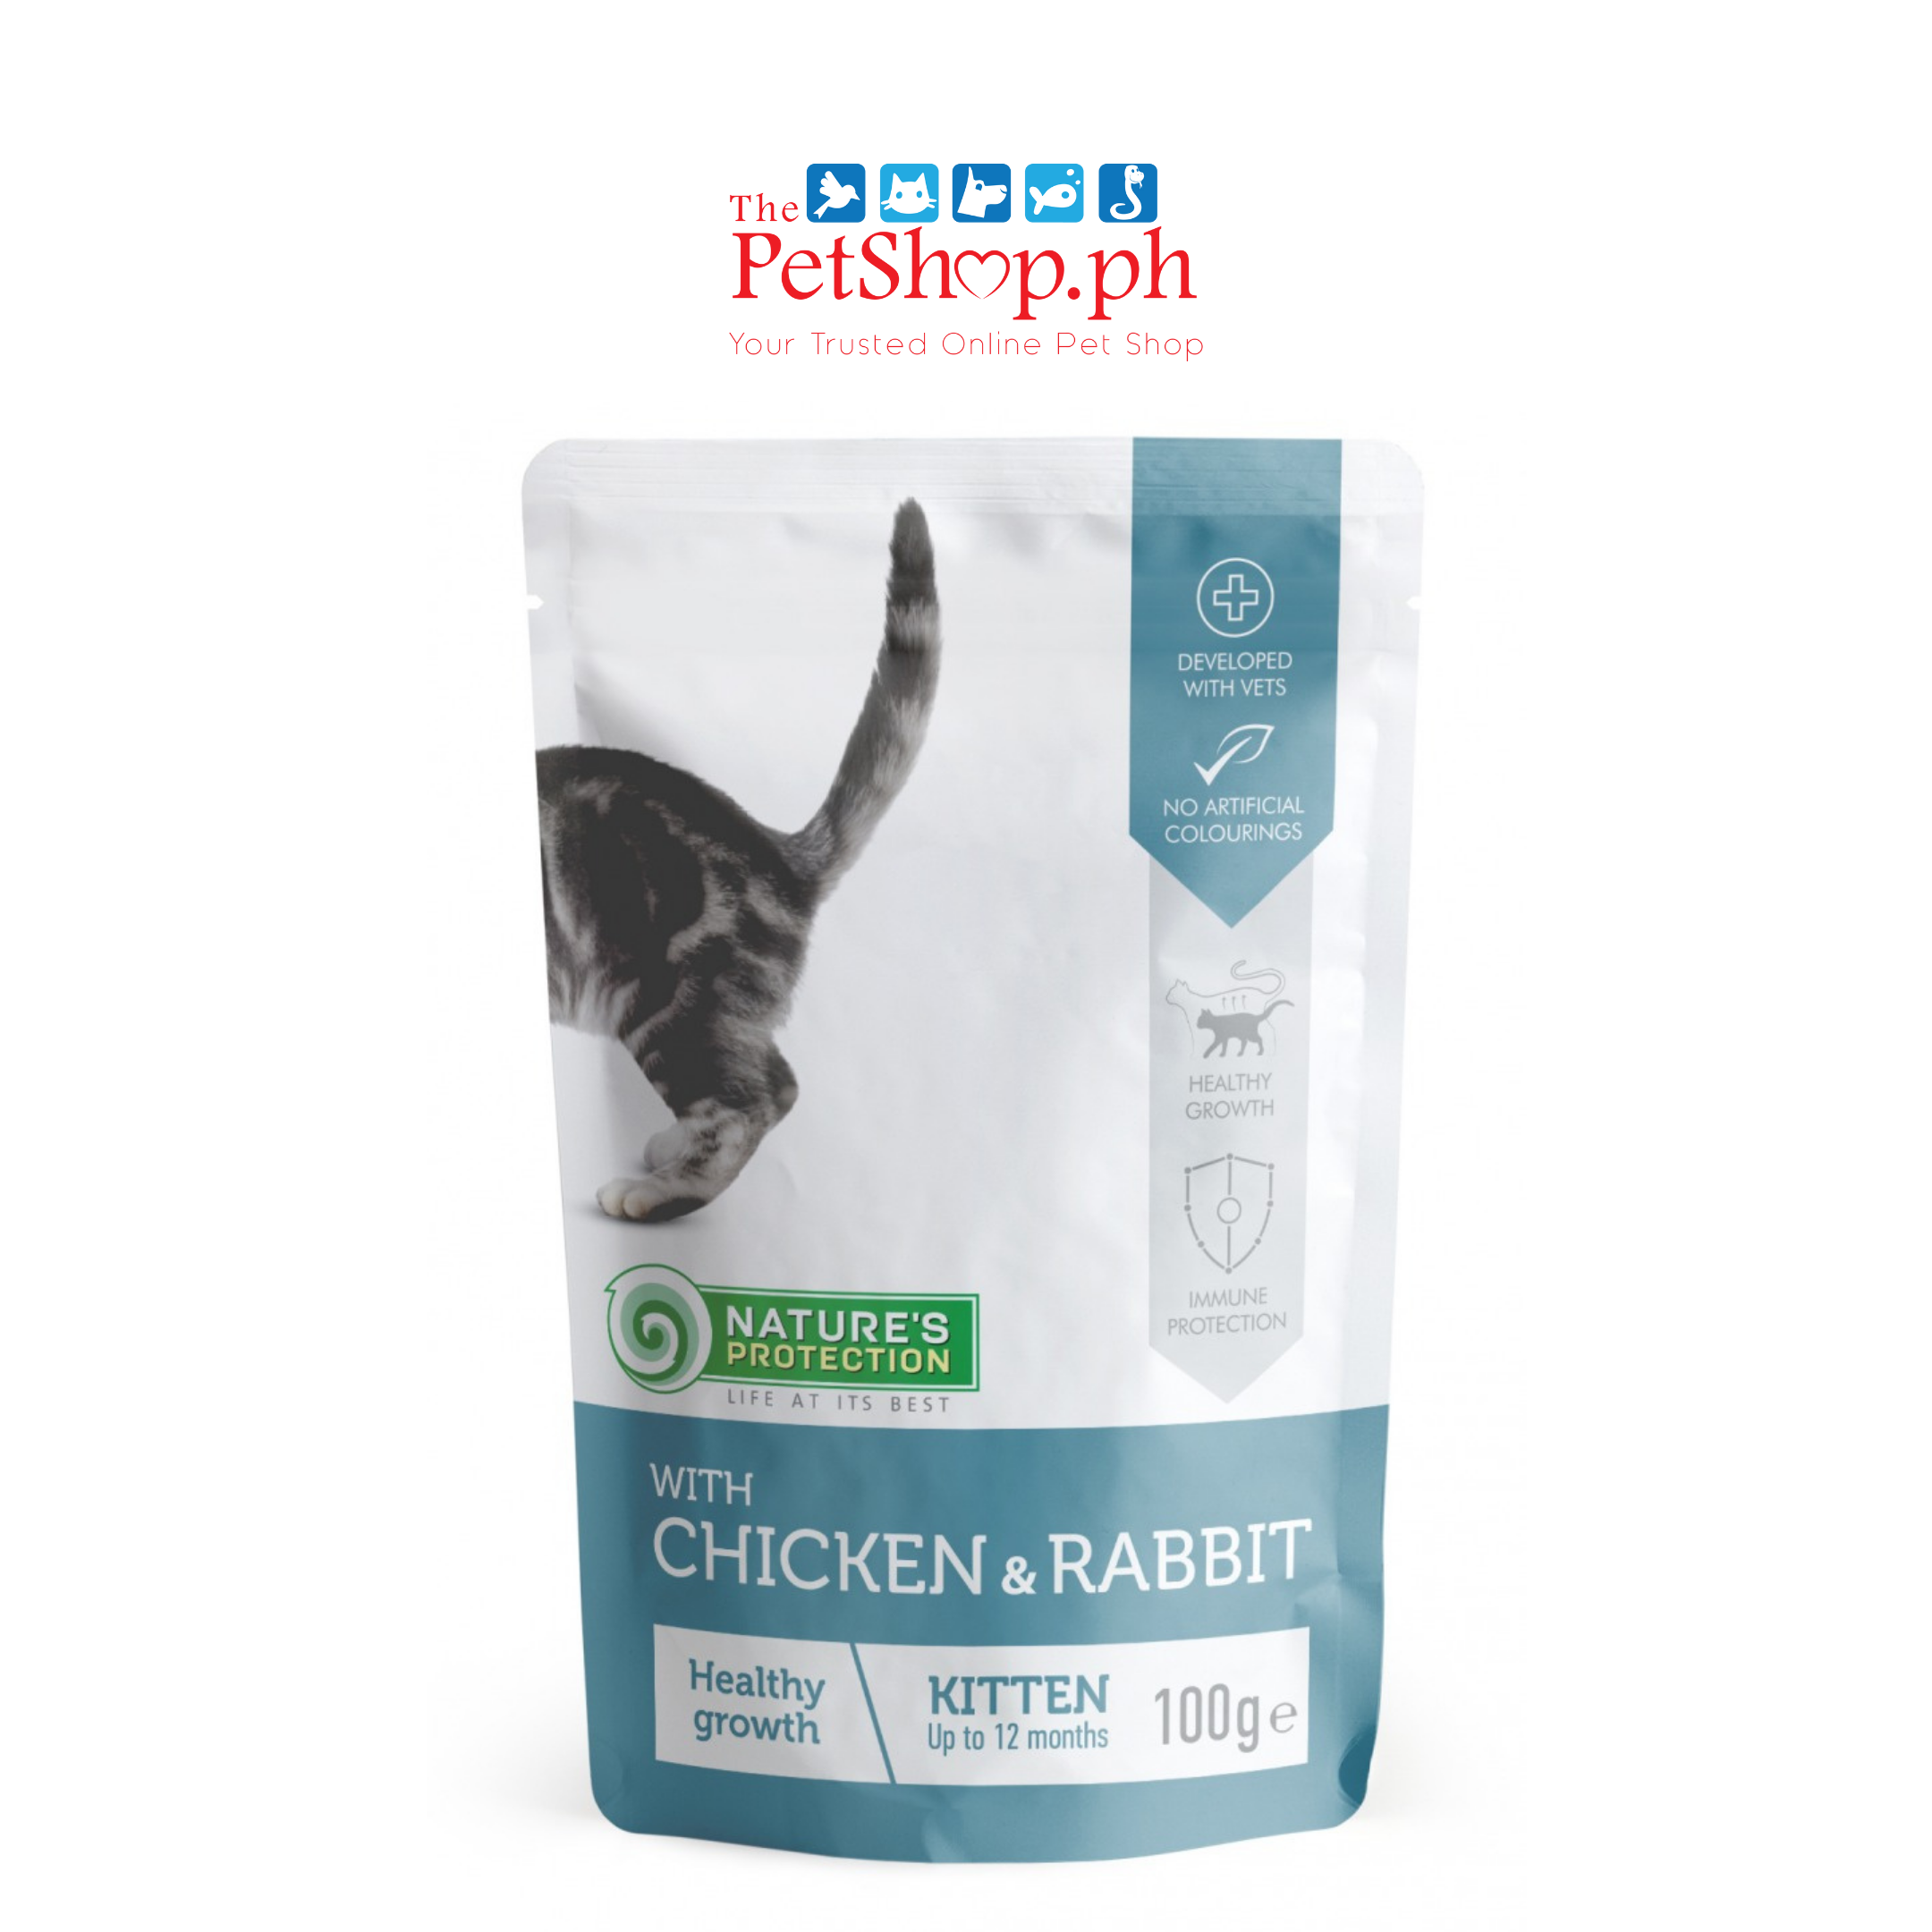 Nature's Protection Kitten with Chicken & Rabbit 100g Healthy Growth